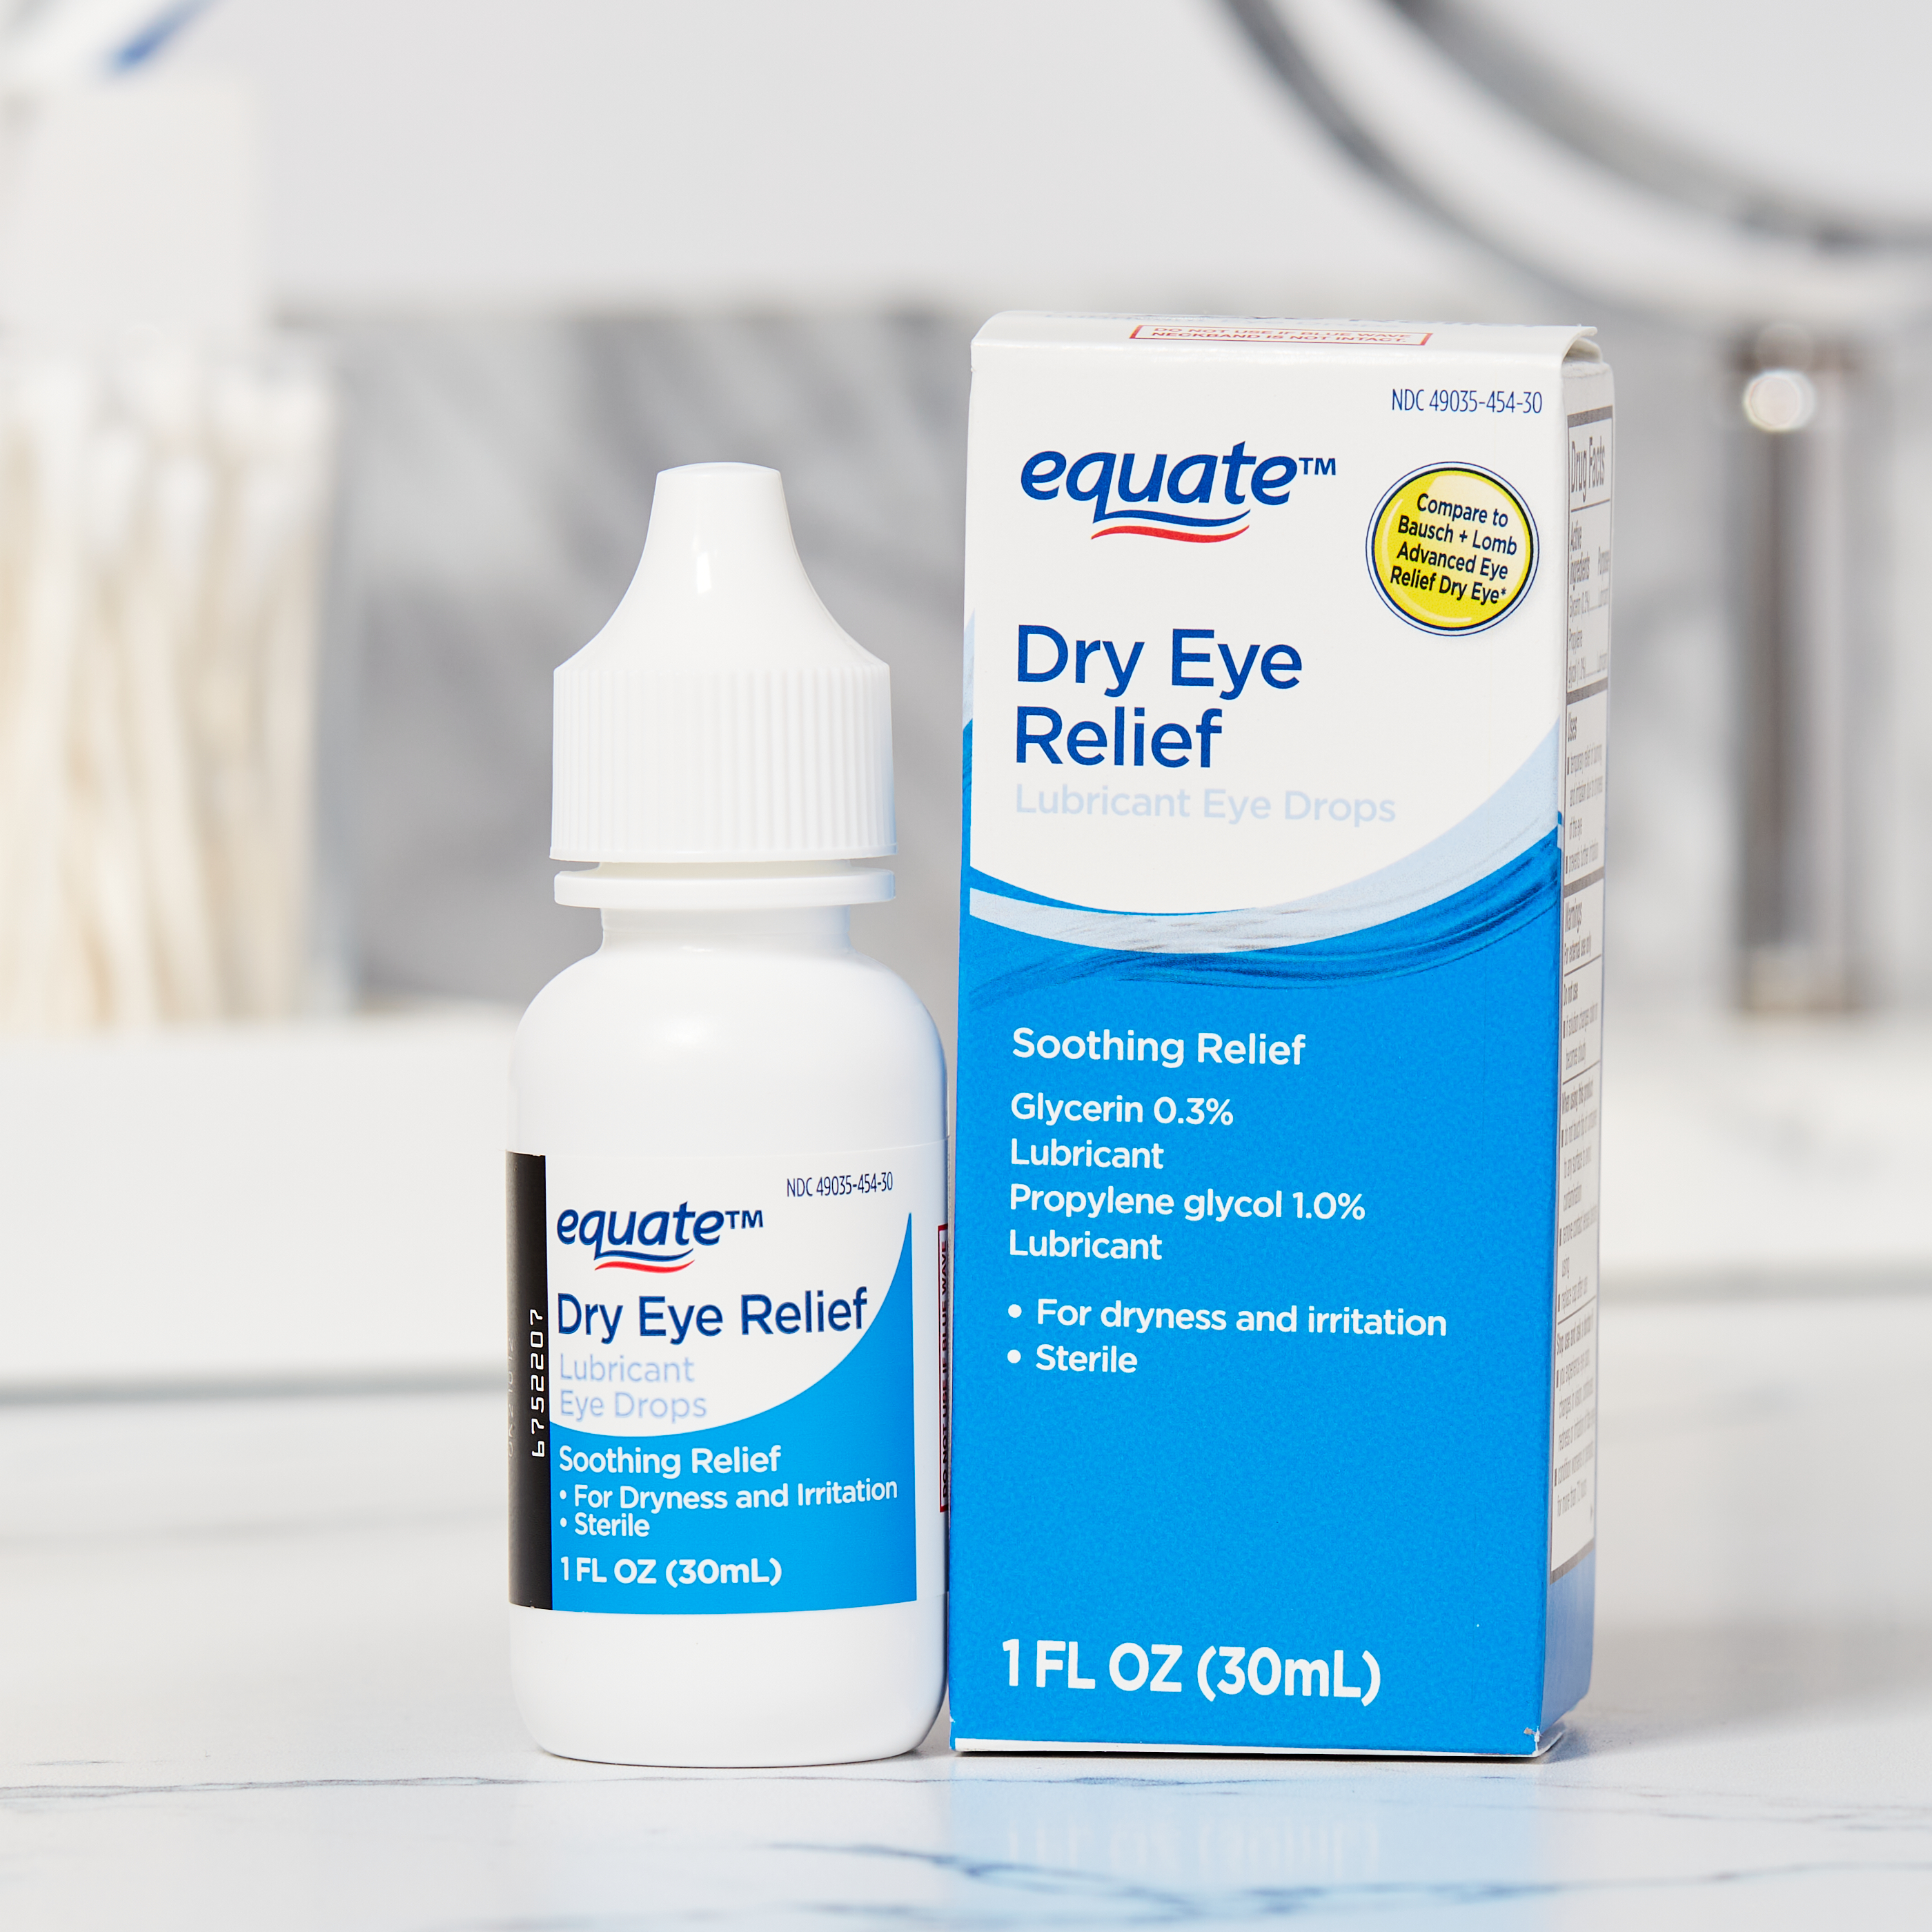 Equate Dry Eye Relief Lubricant Eye Drops, 1 fl oz - image 3 of 9